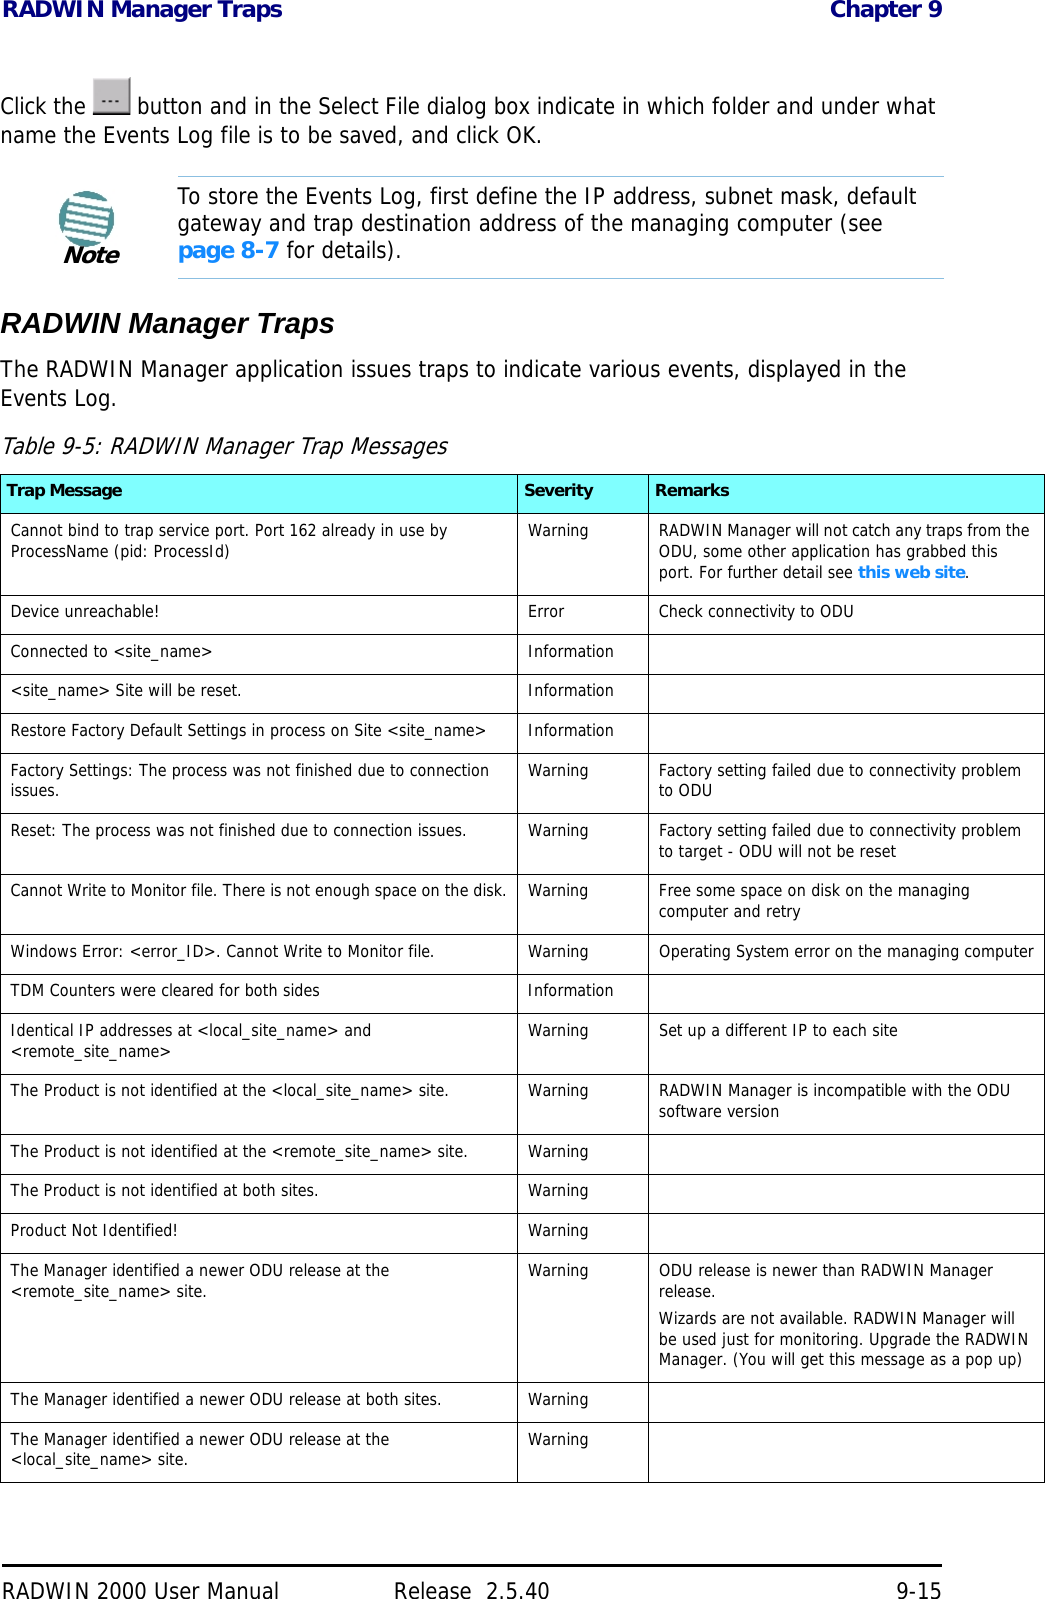 RADWIN Manager Traps Chapter 9RADWIN 2000 User Manual Release  2.5.40 9-15Click the   button and in the Select File dialog box indicate in which folder and under what name the Events Log file is to be saved, and click OK.RADWIN Manager TrapsThe RADWIN Manager application issues traps to indicate various events, displayed in the Events Log.NoteTo store the Events Log, first define the IP address, subnet mask, default gateway and trap destination address of the managing computer (see page 8-7 for details).Table 9-5: RADWIN Manager Trap MessagesTrap Message Severity RemarksCannot bind to trap service port. Port 162 already in use by ProcessName (pid: ProcessId) Warning RADWIN Manager will not catch any traps from the ODU, some other application has grabbed this port. For further detail see this web site.Device unreachable! Error Check connectivity to ODUConnected to &lt;site_name&gt; Information&lt;site_name&gt; Site will be reset. InformationRestore Factory Default Settings in process on Site &lt;site_name&gt; InformationFactory Settings: The process was not finished due to connection issues. Warning Factory setting failed due to connectivity problem to ODUReset: The process was not finished due to connection issues. Warning Factory setting failed due to connectivity problem to target - ODU will not be resetCannot Write to Monitor file. There is not enough space on the disk. Warning Free some space on disk on the managing computer and retryWindows Error: &lt;error_ID&gt;. Cannot Write to Monitor file. Warning Operating System error on the managing computerTDM Counters were cleared for both sides InformationIdentical IP addresses at &lt;local_site_name&gt; and &lt;remote_site_name&gt; Warning Set up a different IP to each site The Product is not identified at the &lt;local_site_name&gt; site. Warning RADWIN Manager is incompatible with the ODU software versionThe Product is not identified at the &lt;remote_site_name&gt; site. WarningThe Product is not identified at both sites. WarningProduct Not Identified! WarningThe Manager identified a newer ODU release at the &lt;remote_site_name&gt; site. Warning ODU release is newer than RADWIN Manager release.Wizards are not available. RADWIN Manager will be used just for monitoring. Upgrade the RADWIN Manager. (You will get this message as a pop up) The Manager identified a newer ODU release at both sites. WarningThe Manager identified a newer ODU release at the &lt;local_site_name&gt; site. Warning